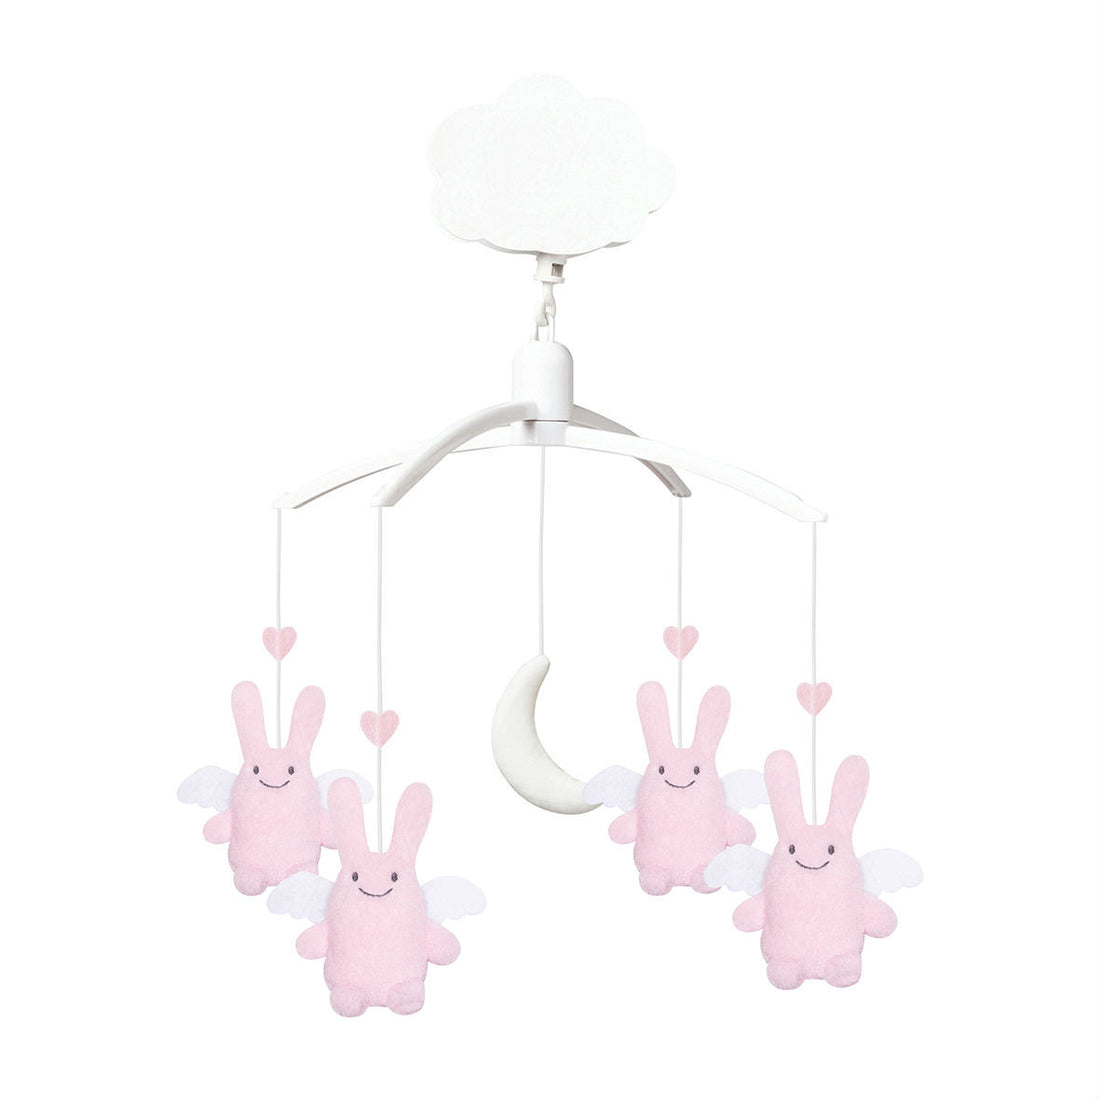 trousselier-musical-mobile-angel-bunny-pink-01